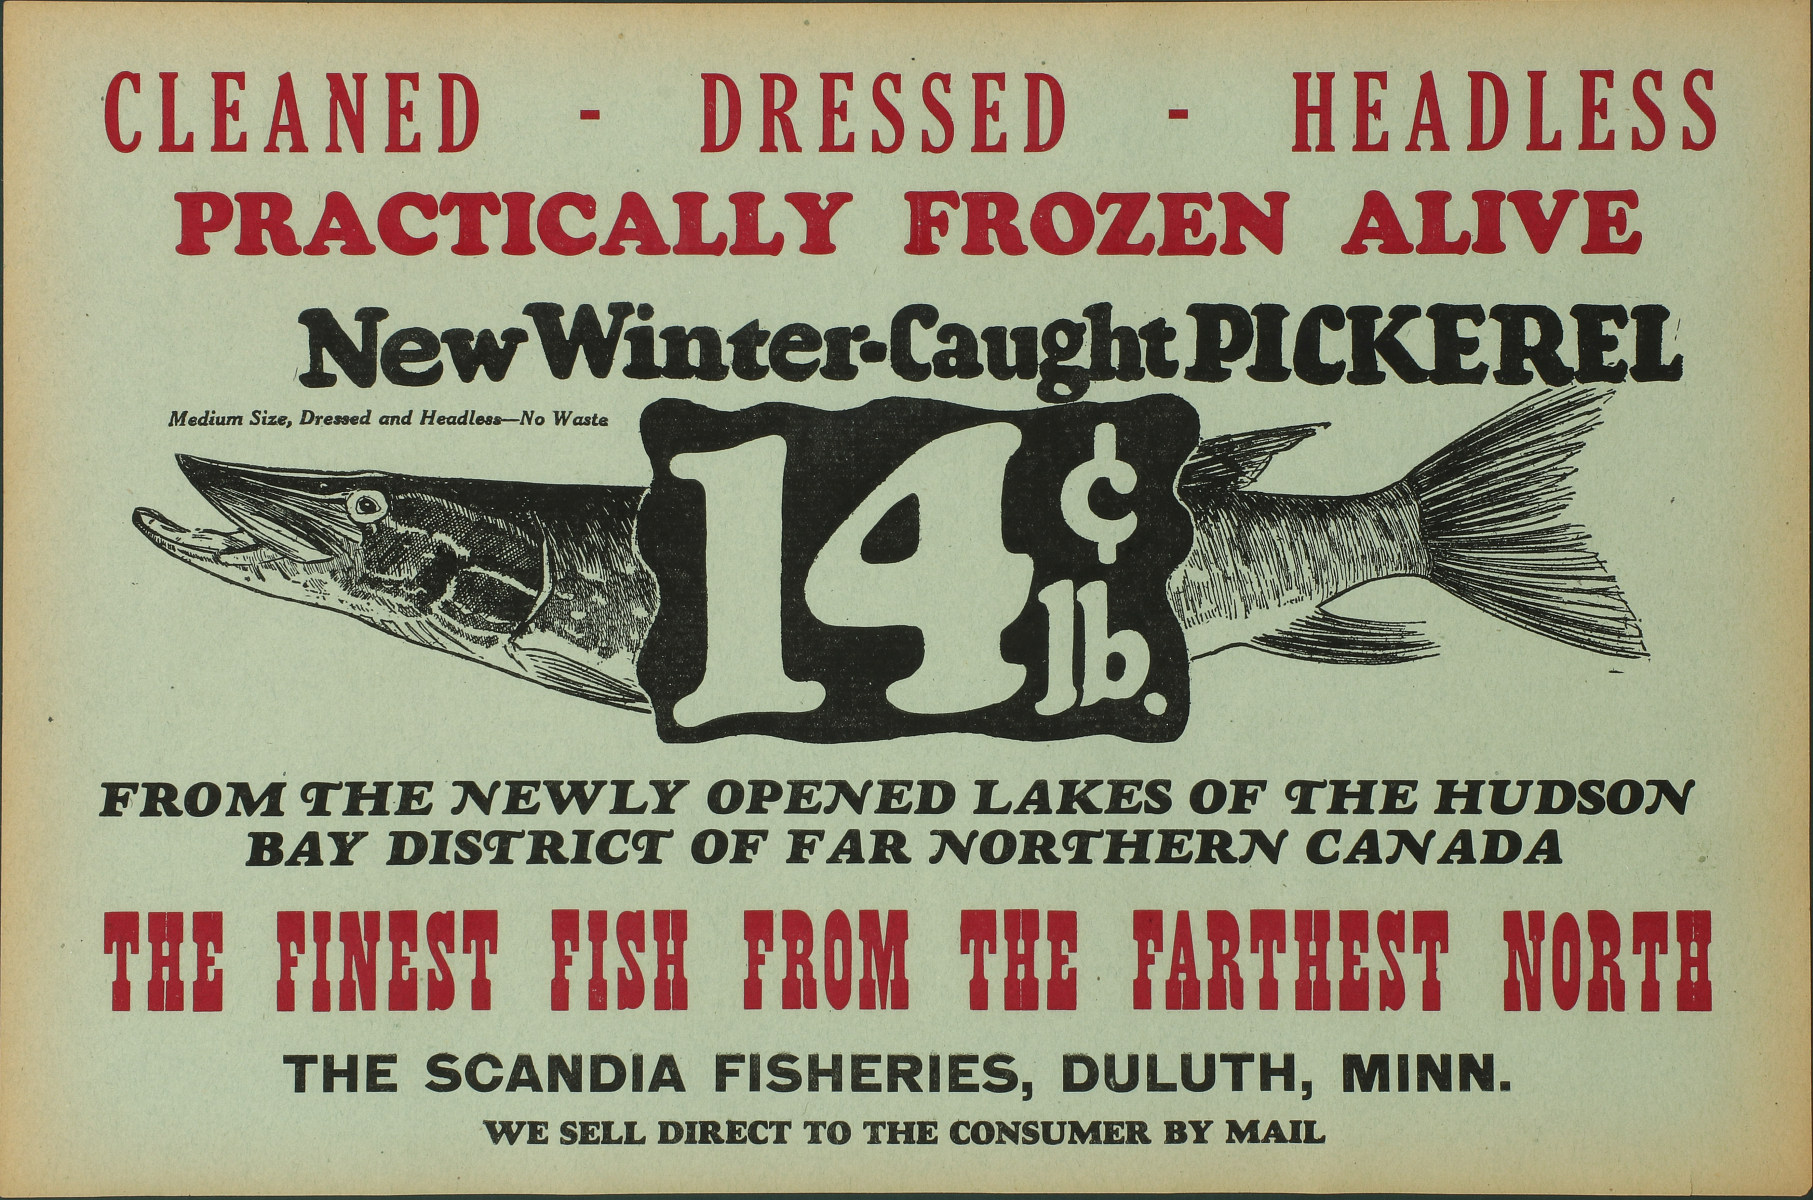 ADVERTISING SIGN FOR SCANDIA FISHERIES, DULUTH